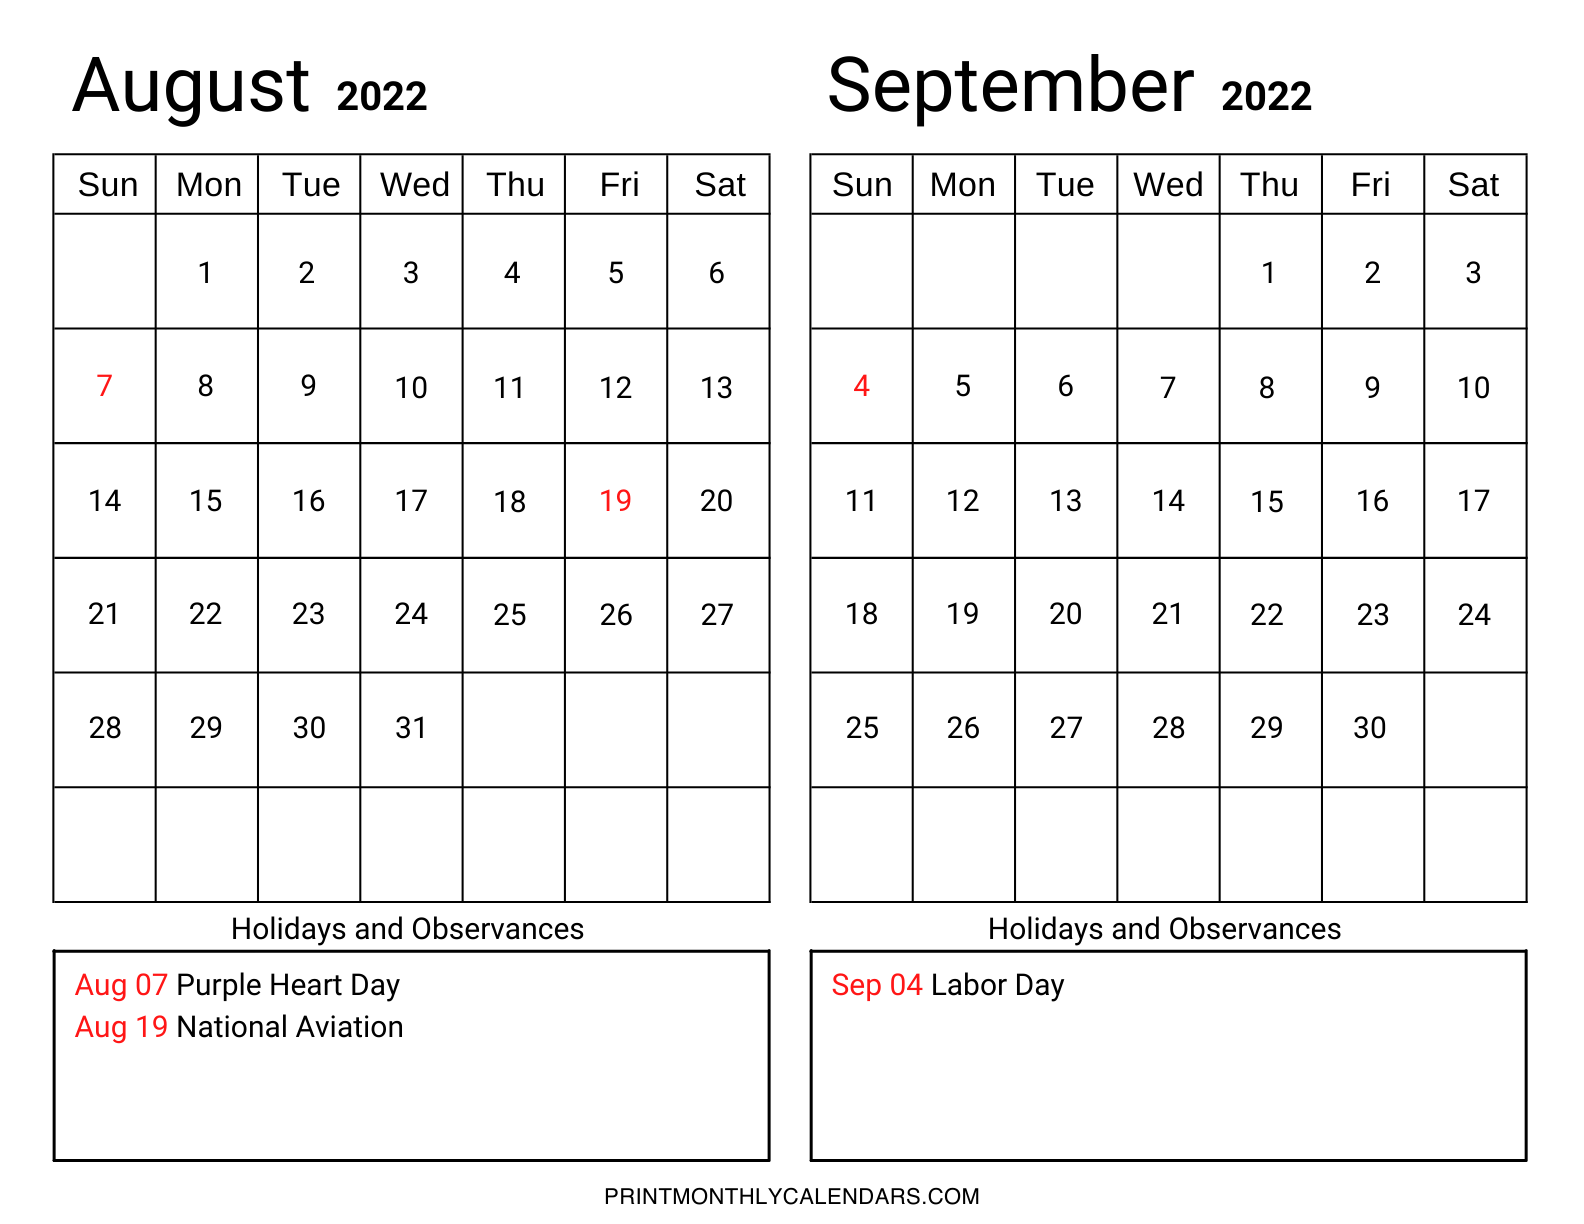 Calendar of US holidays and observances for August and September 2022, with bold monthly dates in the grid. Weekdays start on Sunday in this landscape layout template, and a list of holidays is given at the bottom of the grid in red font color.